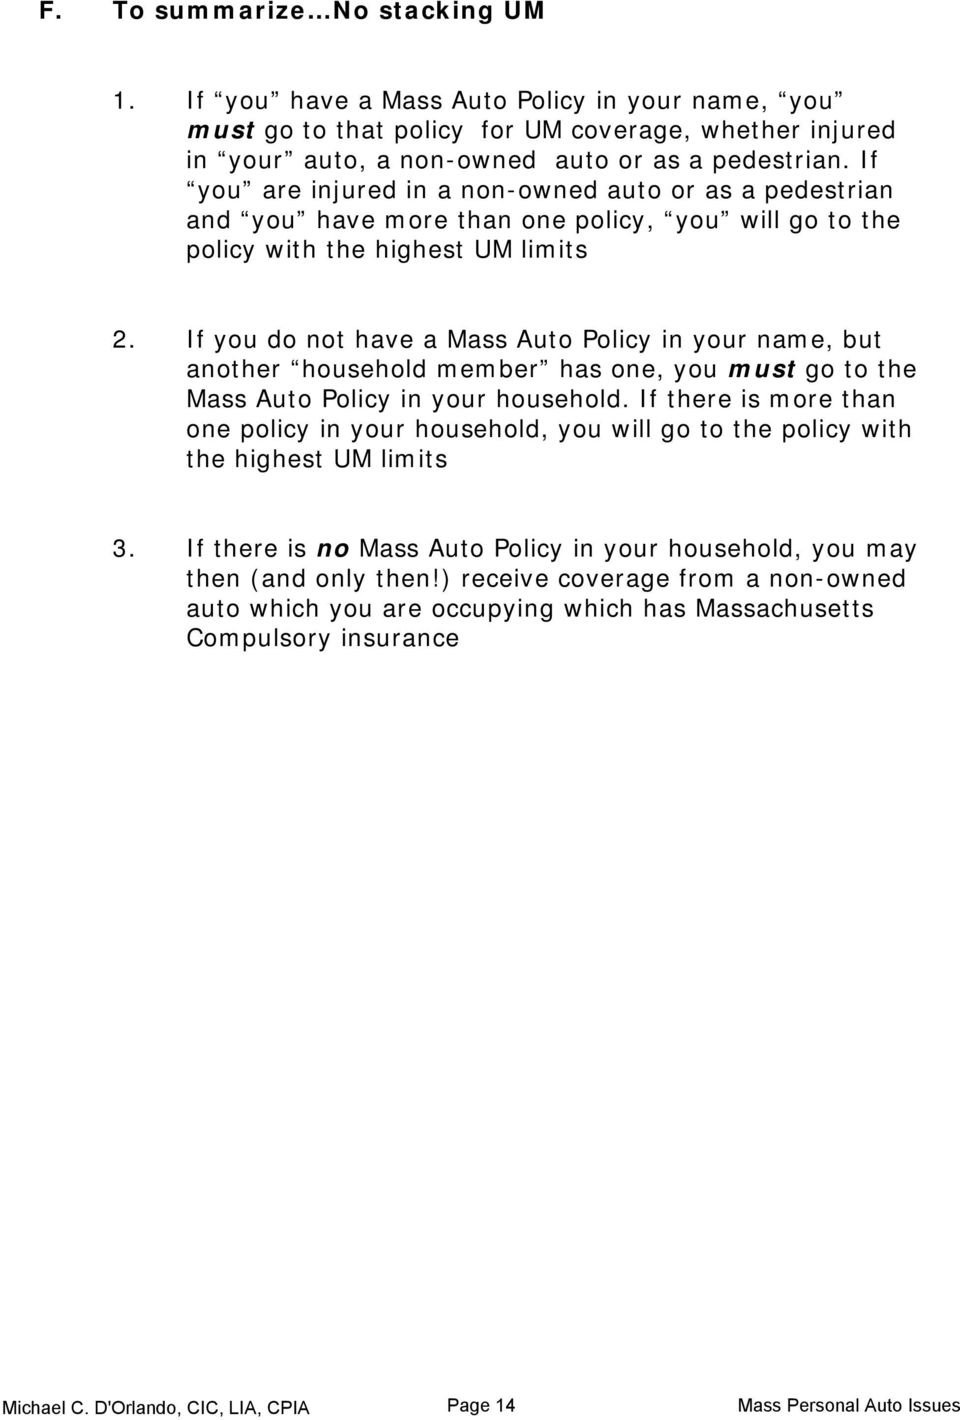 If you do not have a Mass Auto Policy in your name, but another household member has one, you must go to the Mass Auto Policy in your household.